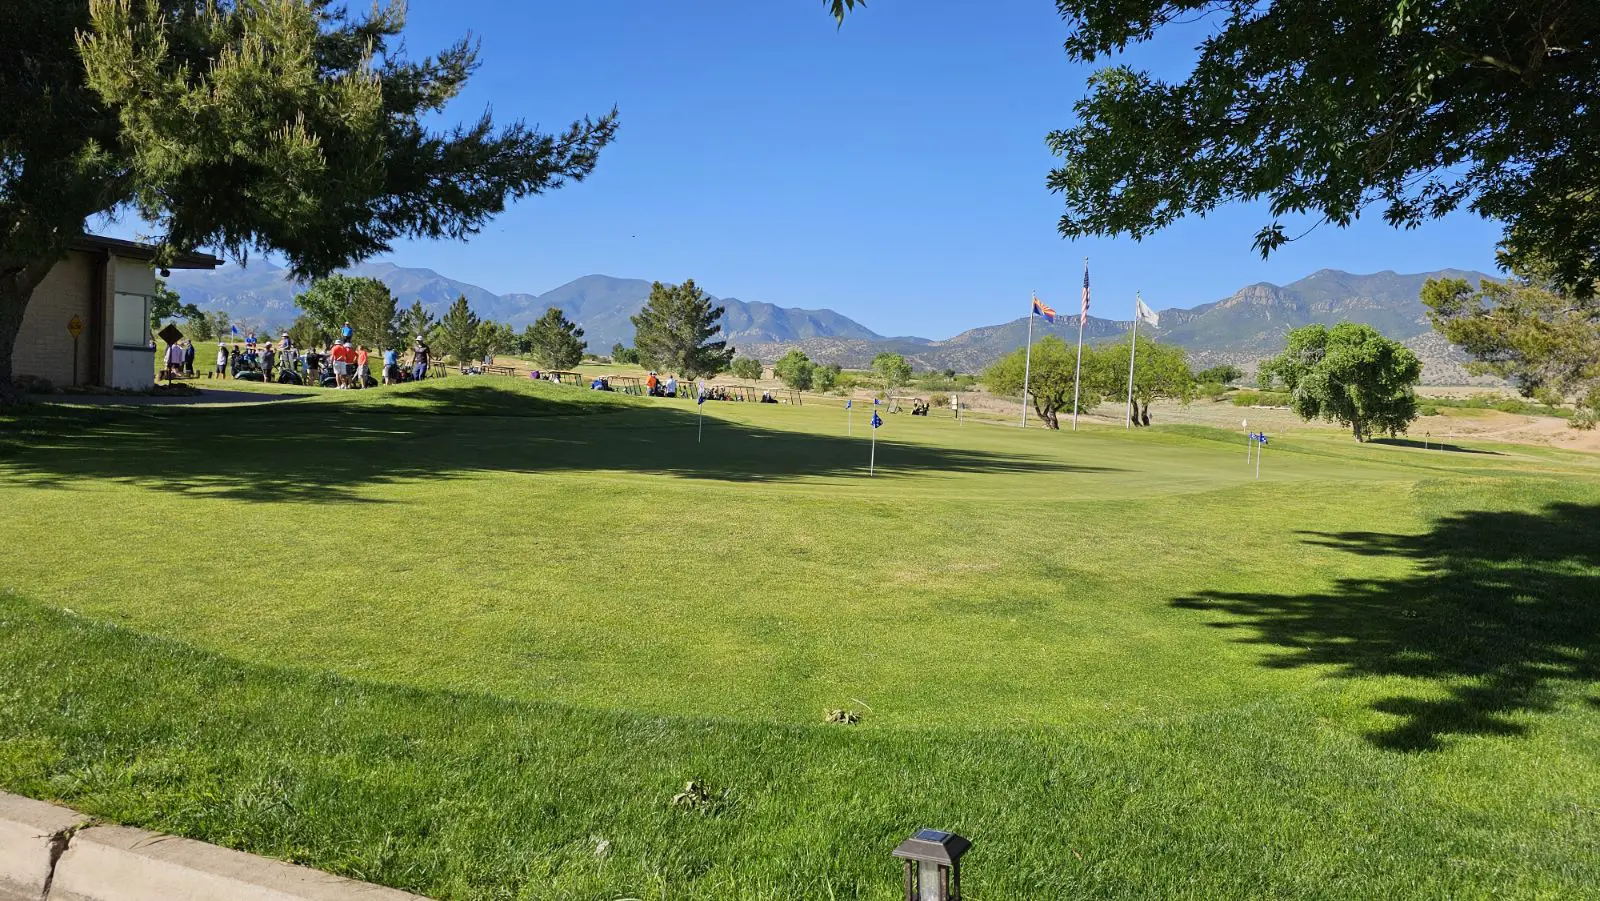 A grassy area with trees and mountains in the background.